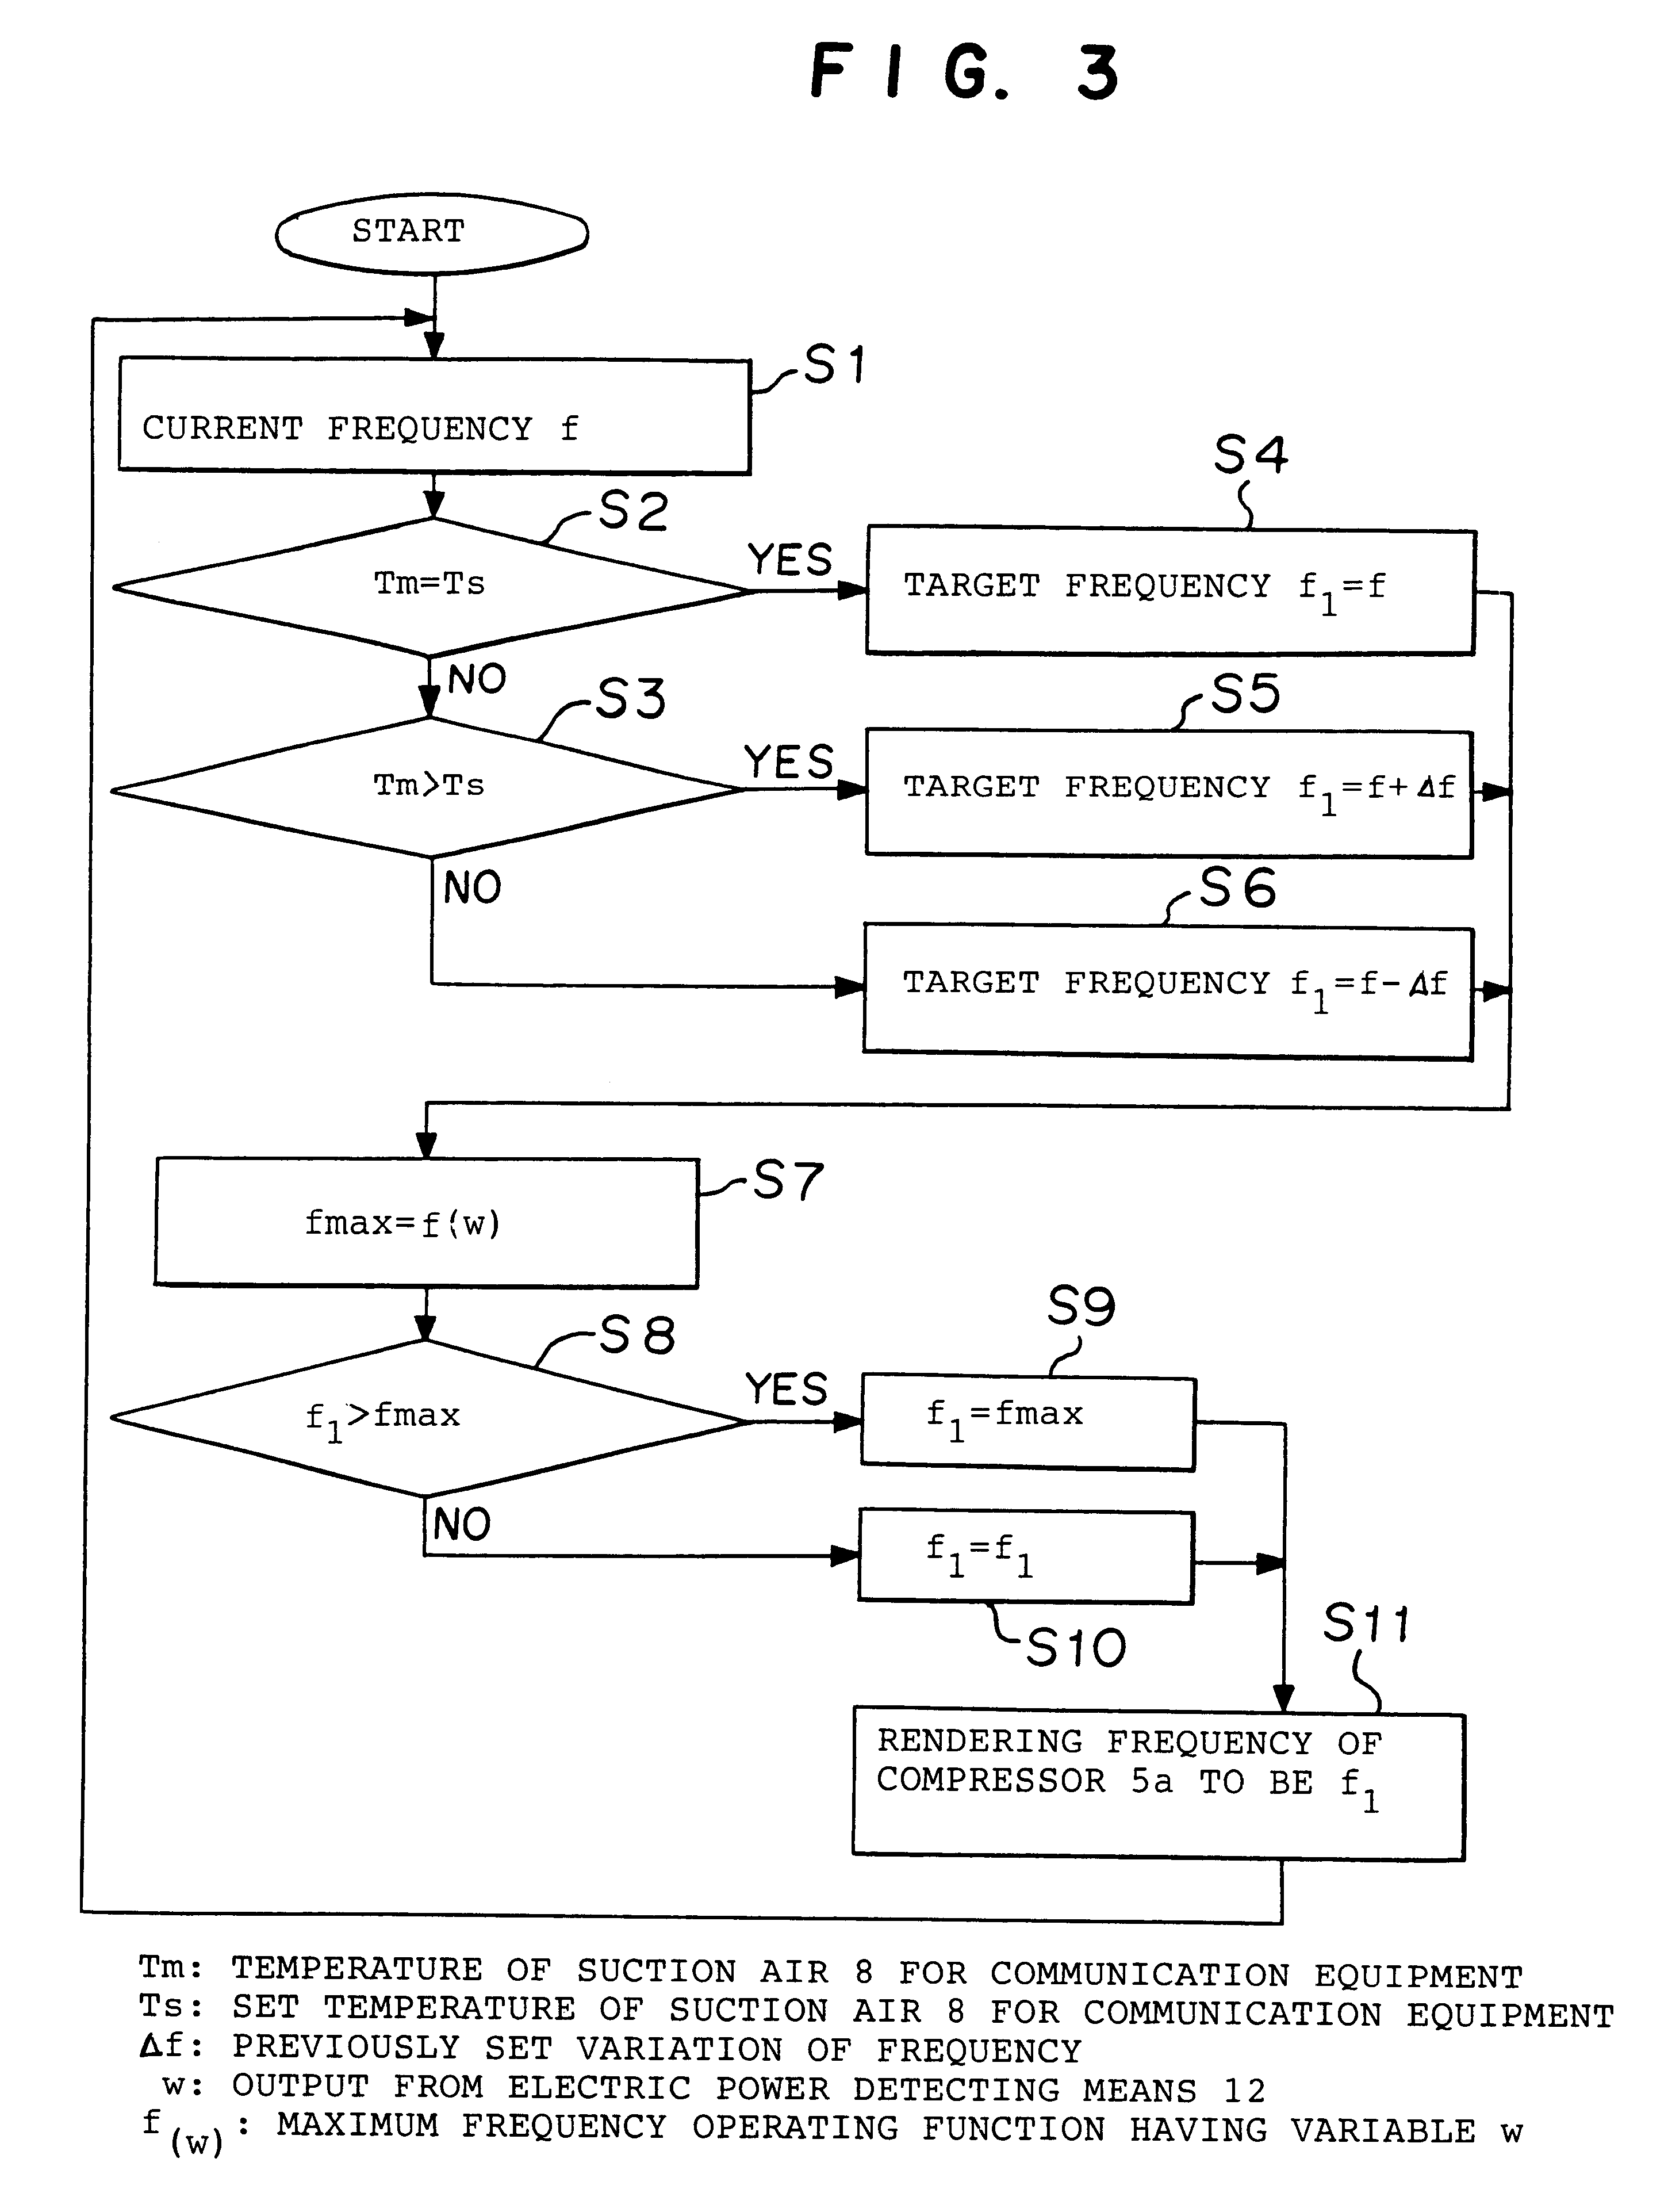 Method for controlling to cool a communication station